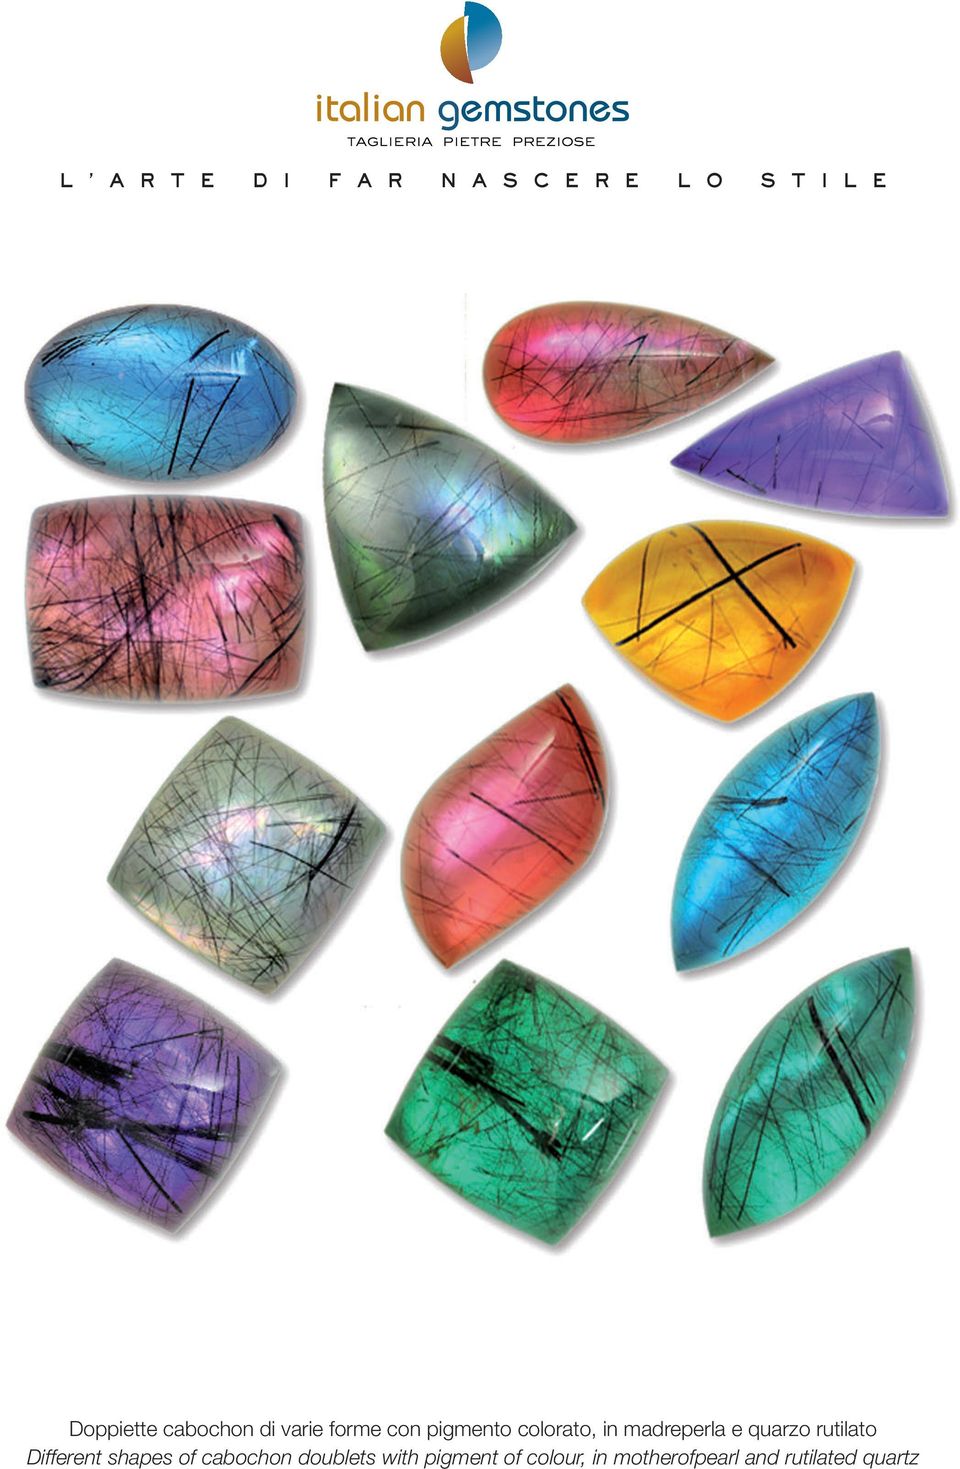 Different shapes of cabochon doublets with